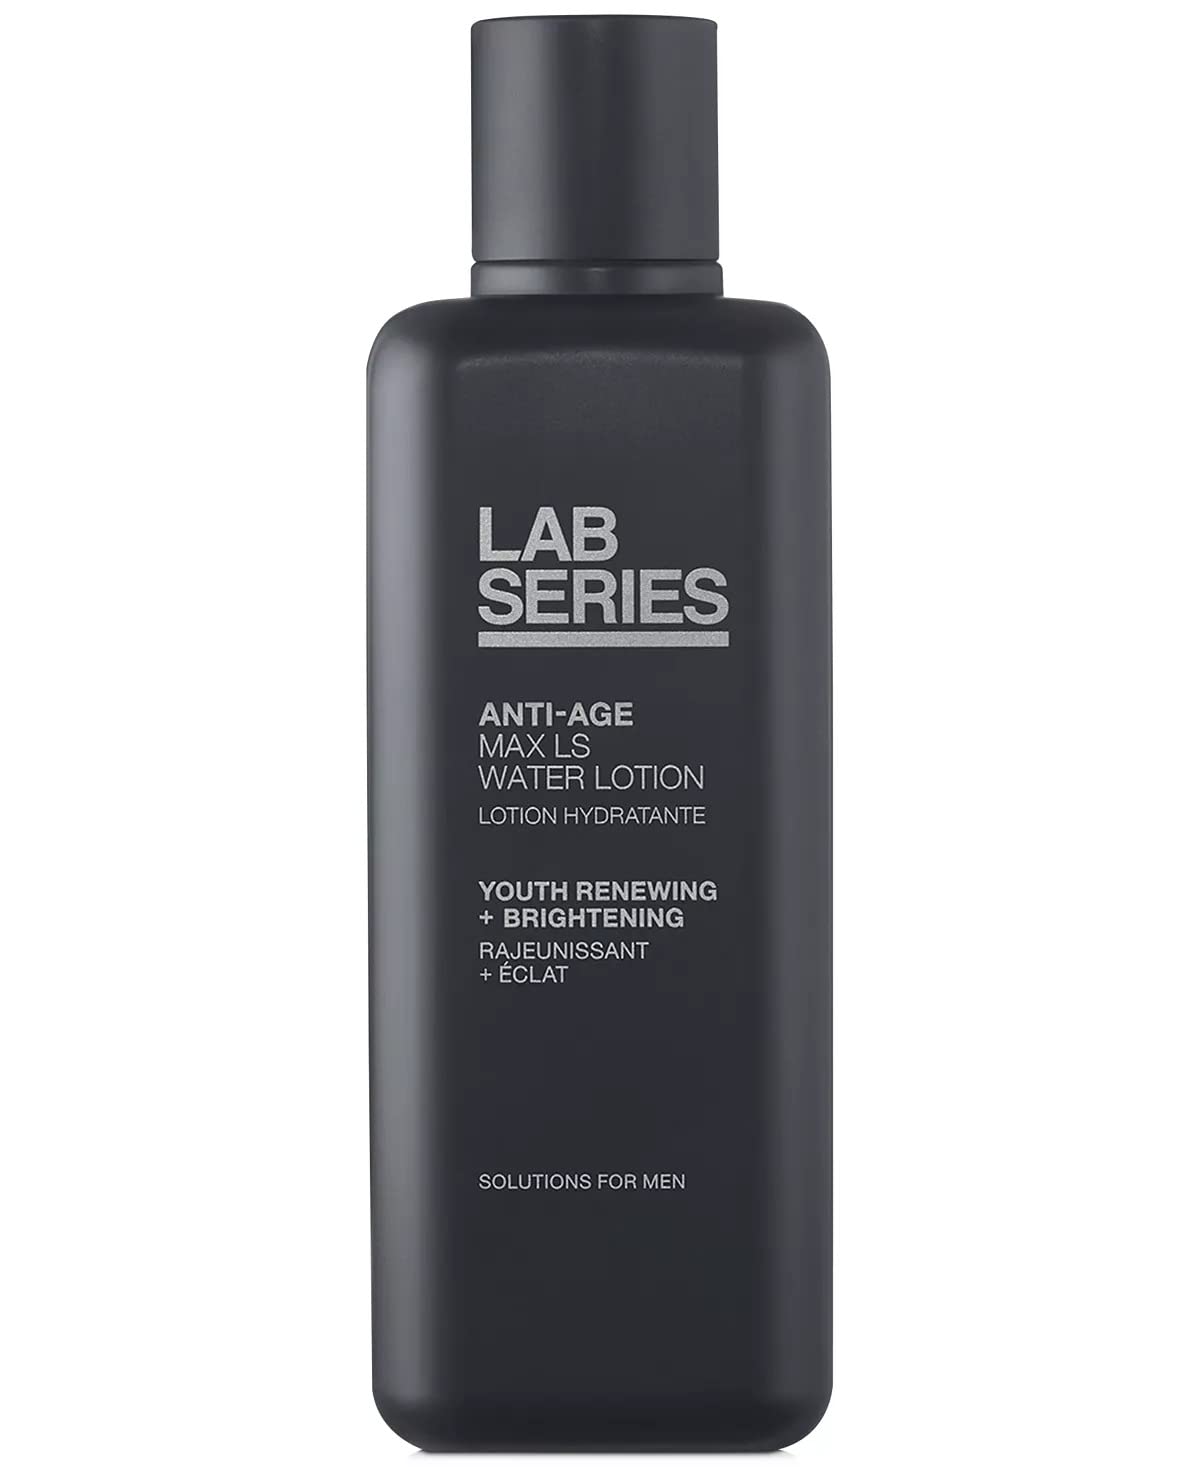 Anti-age Max LS Water Lotion Tonique